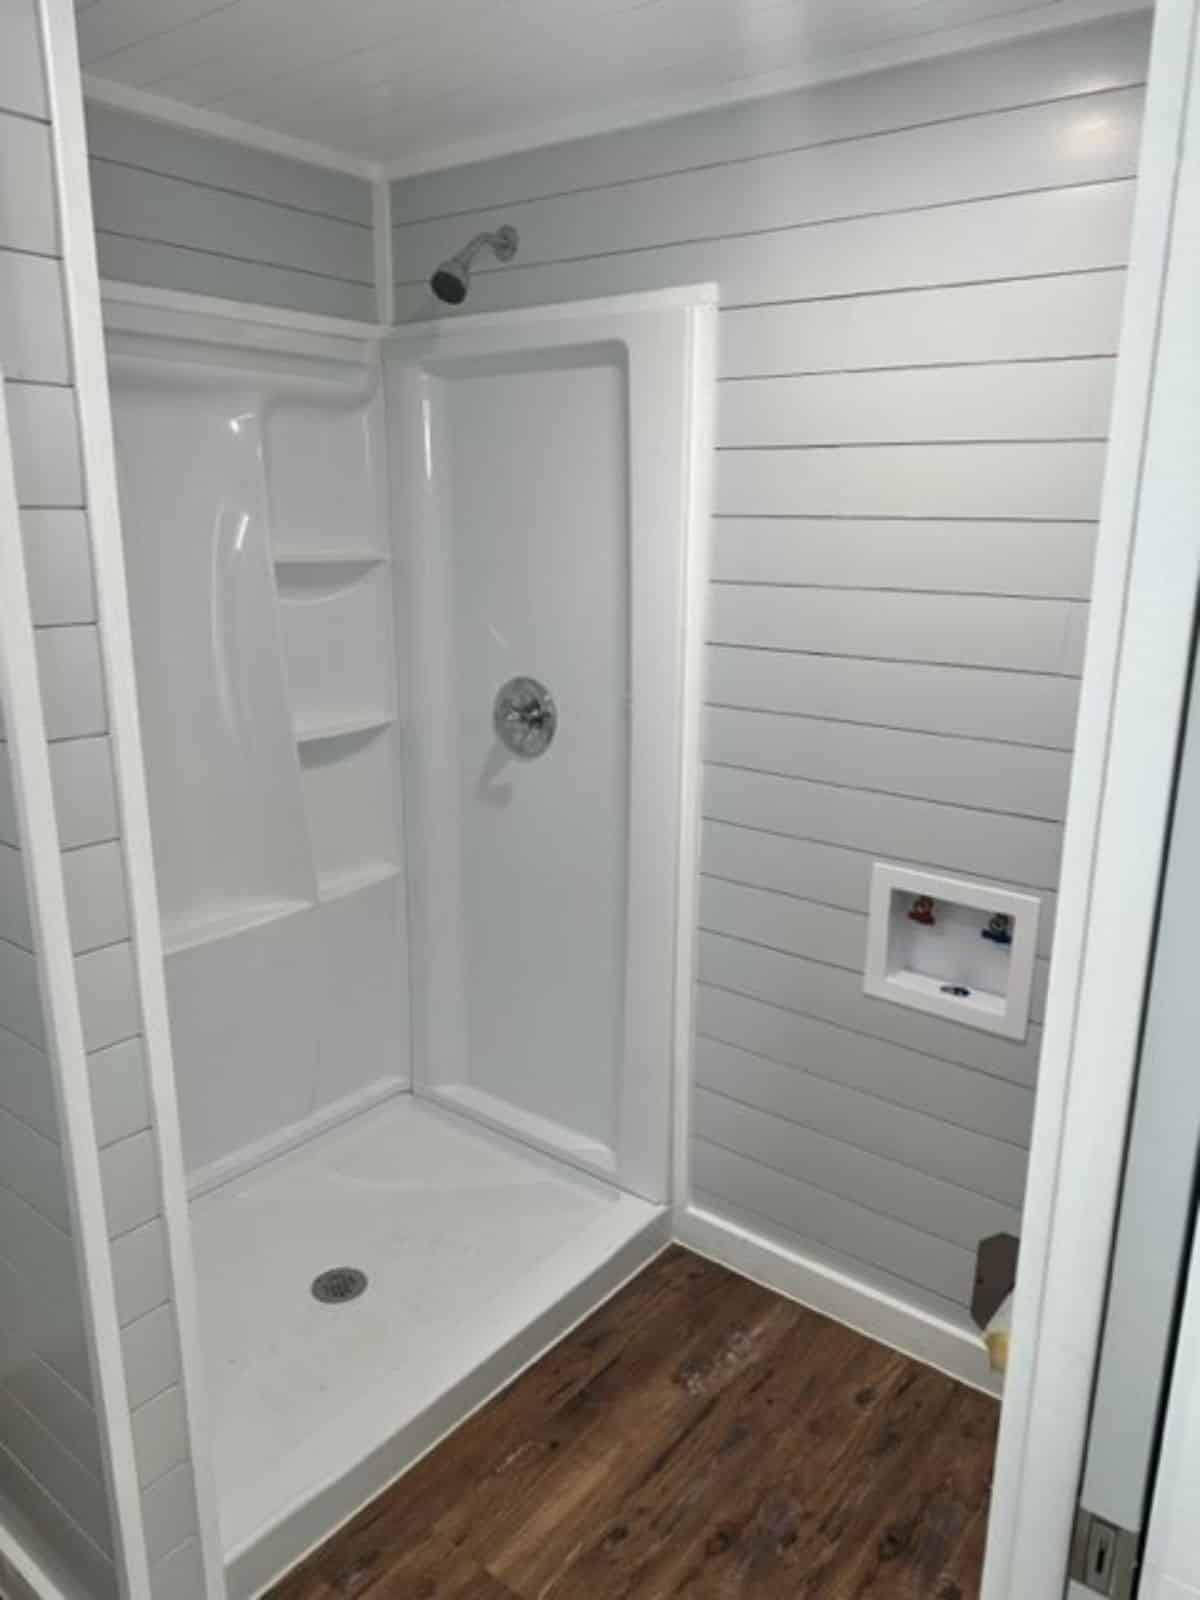 bathroom has all the standard fittings and long shower area